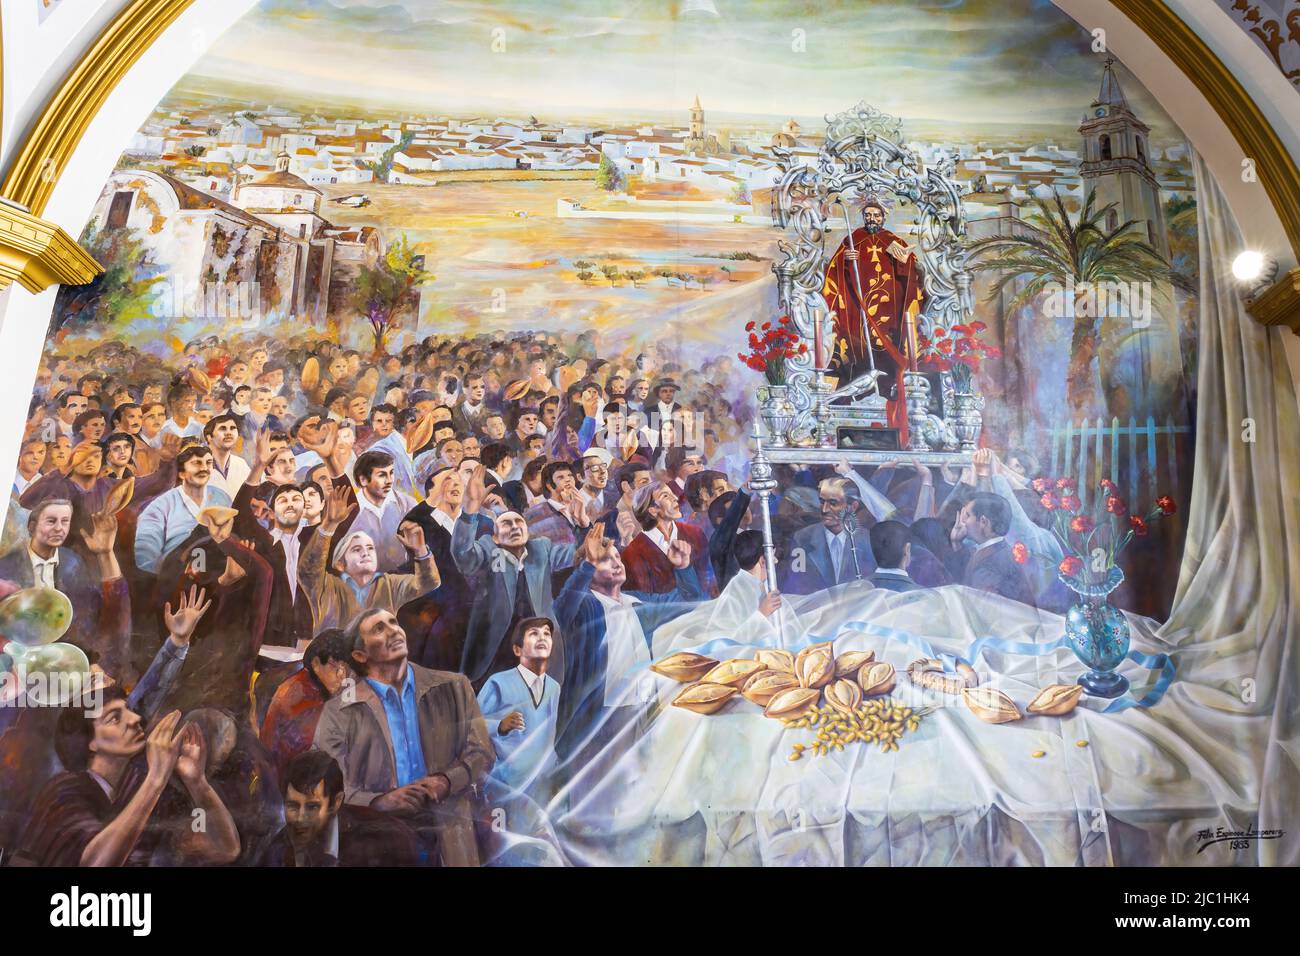 Trigueros, Huelva, Spain - April 17, 2022: fresco painting of San Antonio Abad (Saint Anthony Abbot) in procession, saint of trigueros, painted in the Stock Photo